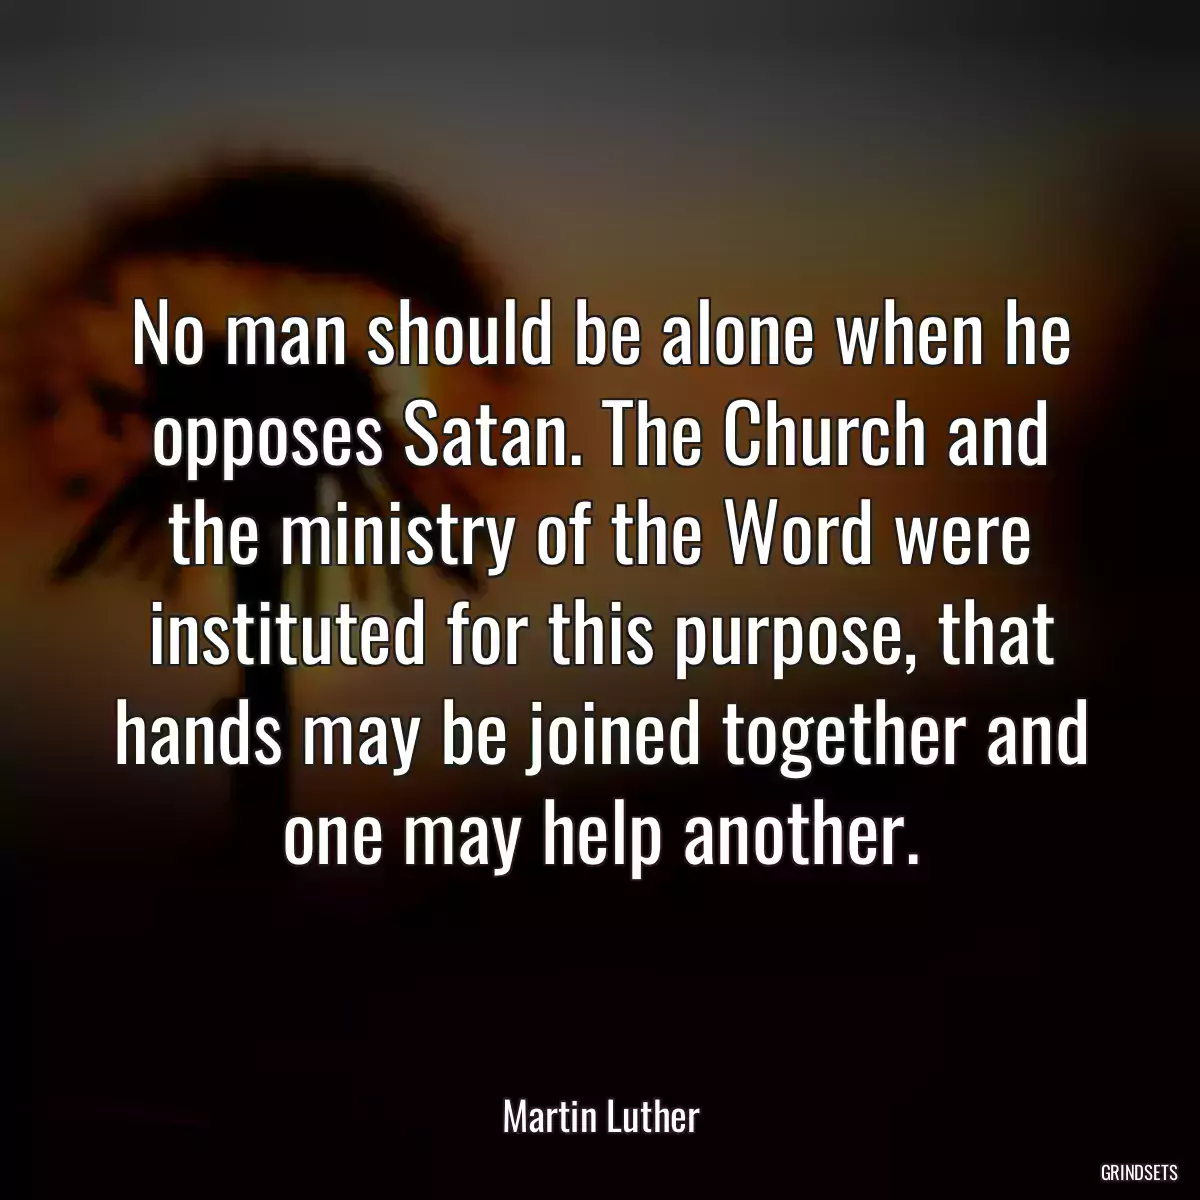 No man should be alone when he opposes Satan. The Church and the ministry of the Word were instituted for this purpose, that hands may be joined together and one may help another.